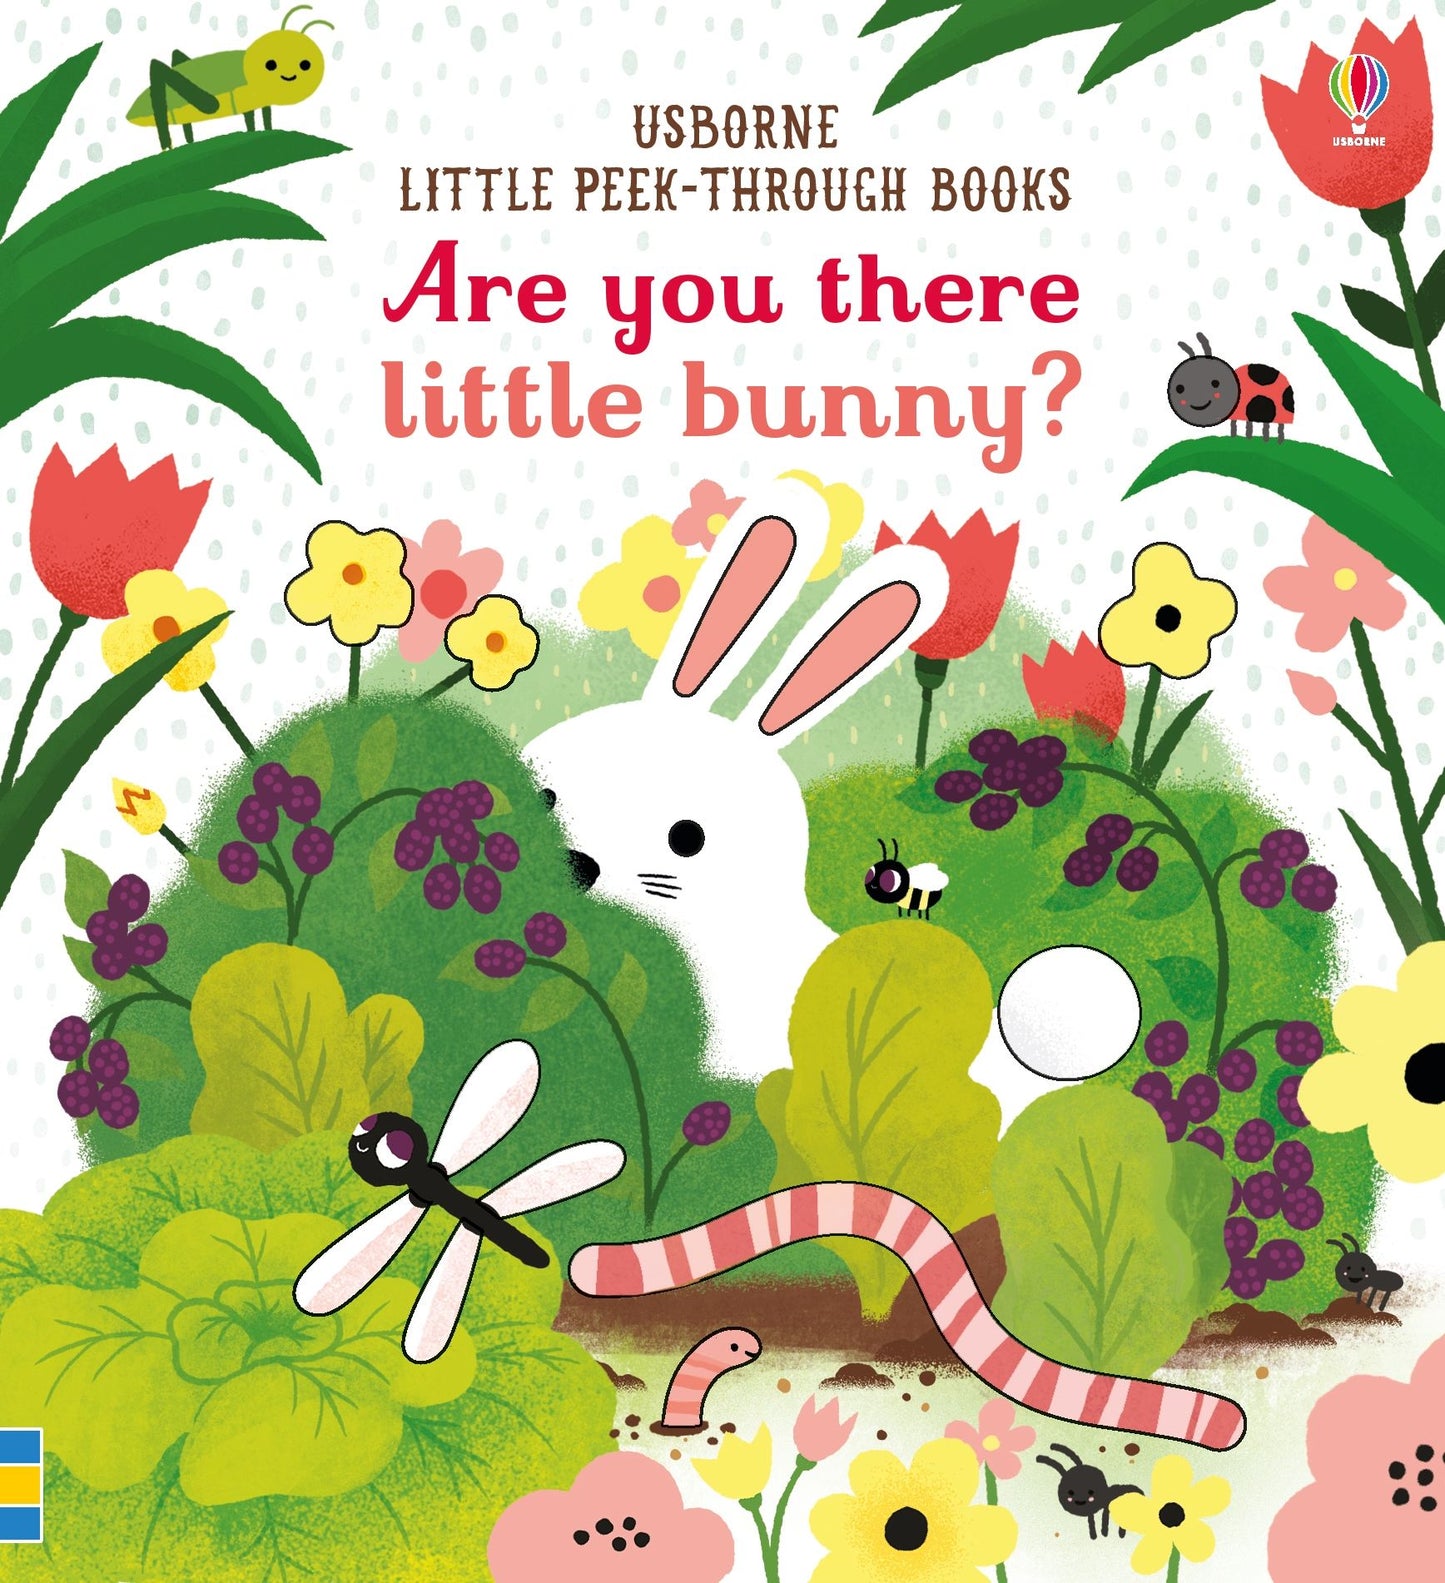 Are You There Little Bunny? (Usborne Little Peek-Through Books)